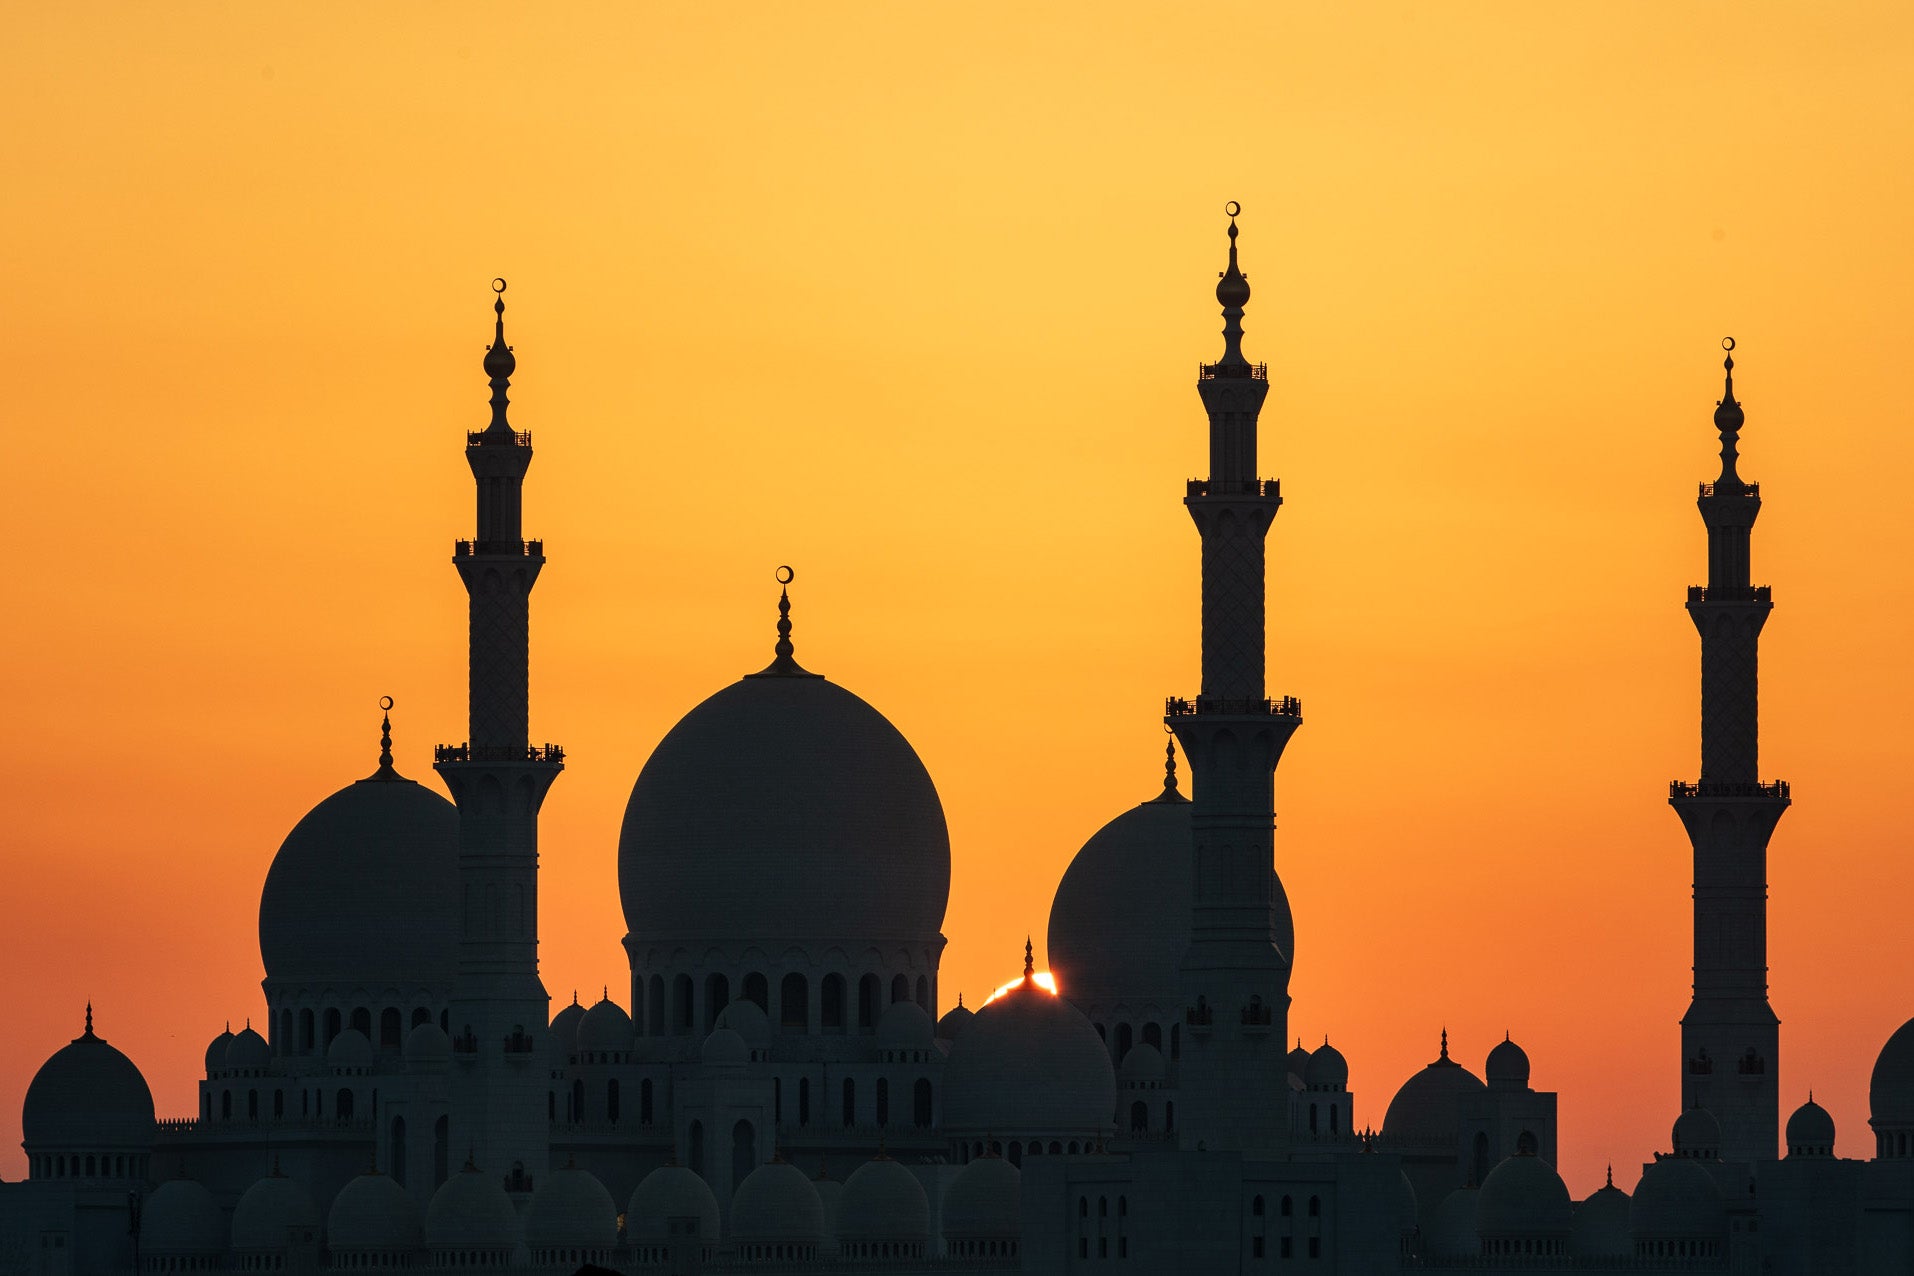 Silhouette of a grand mosque with multiple domes and minarets against a bright orange sunset sky in Abu Dhabi.